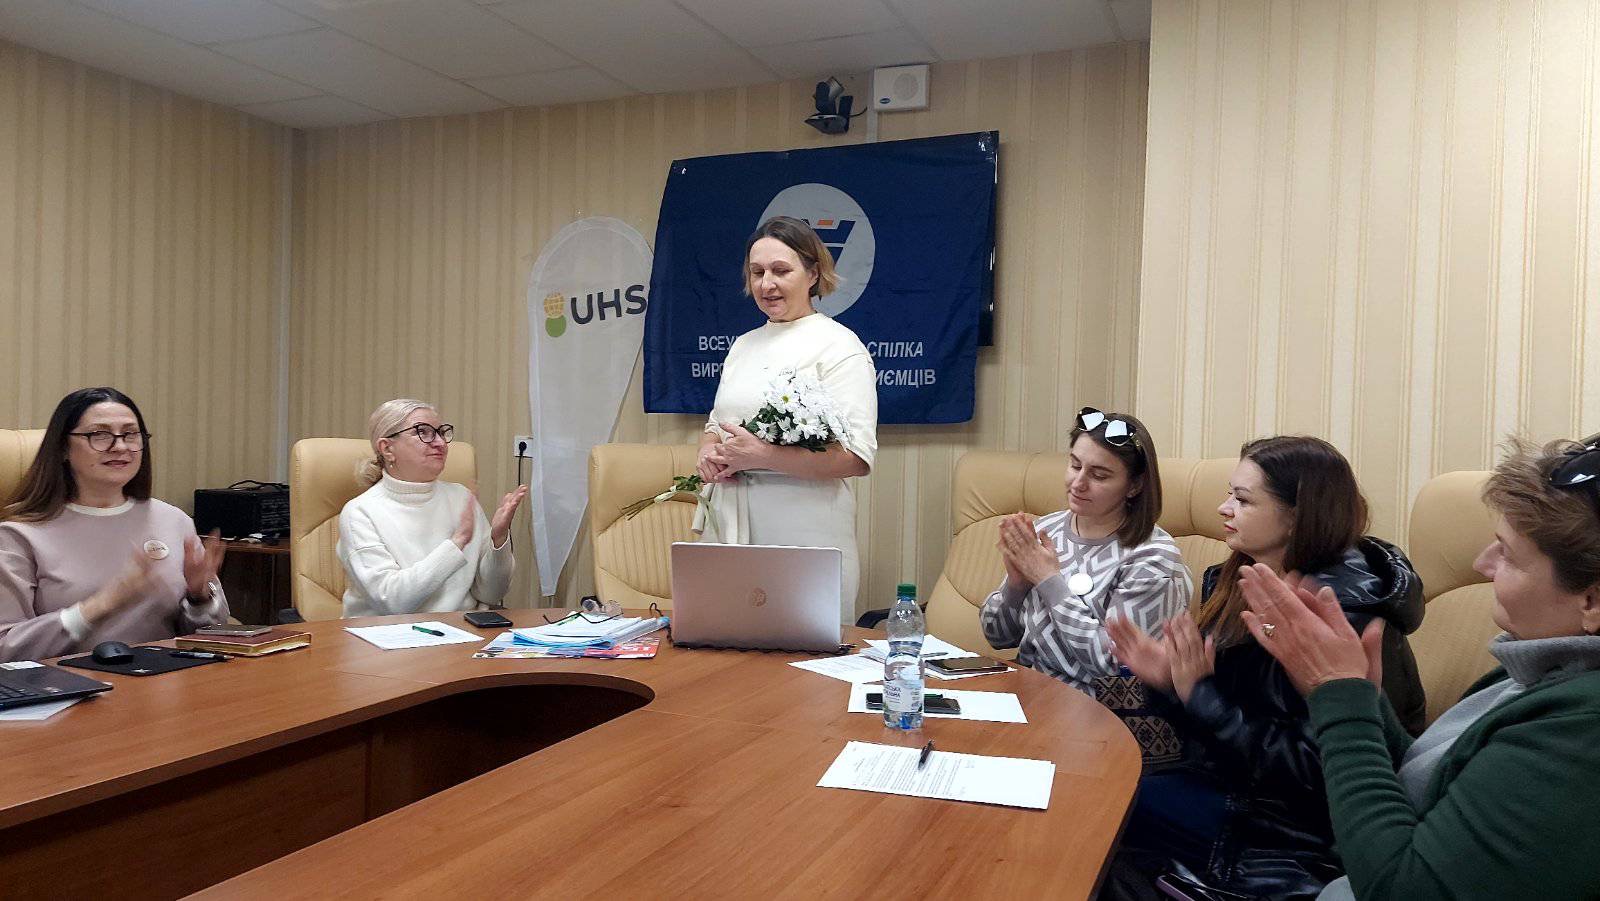 Ukraine: Domestic Workers Organize for Recognition, Dignity